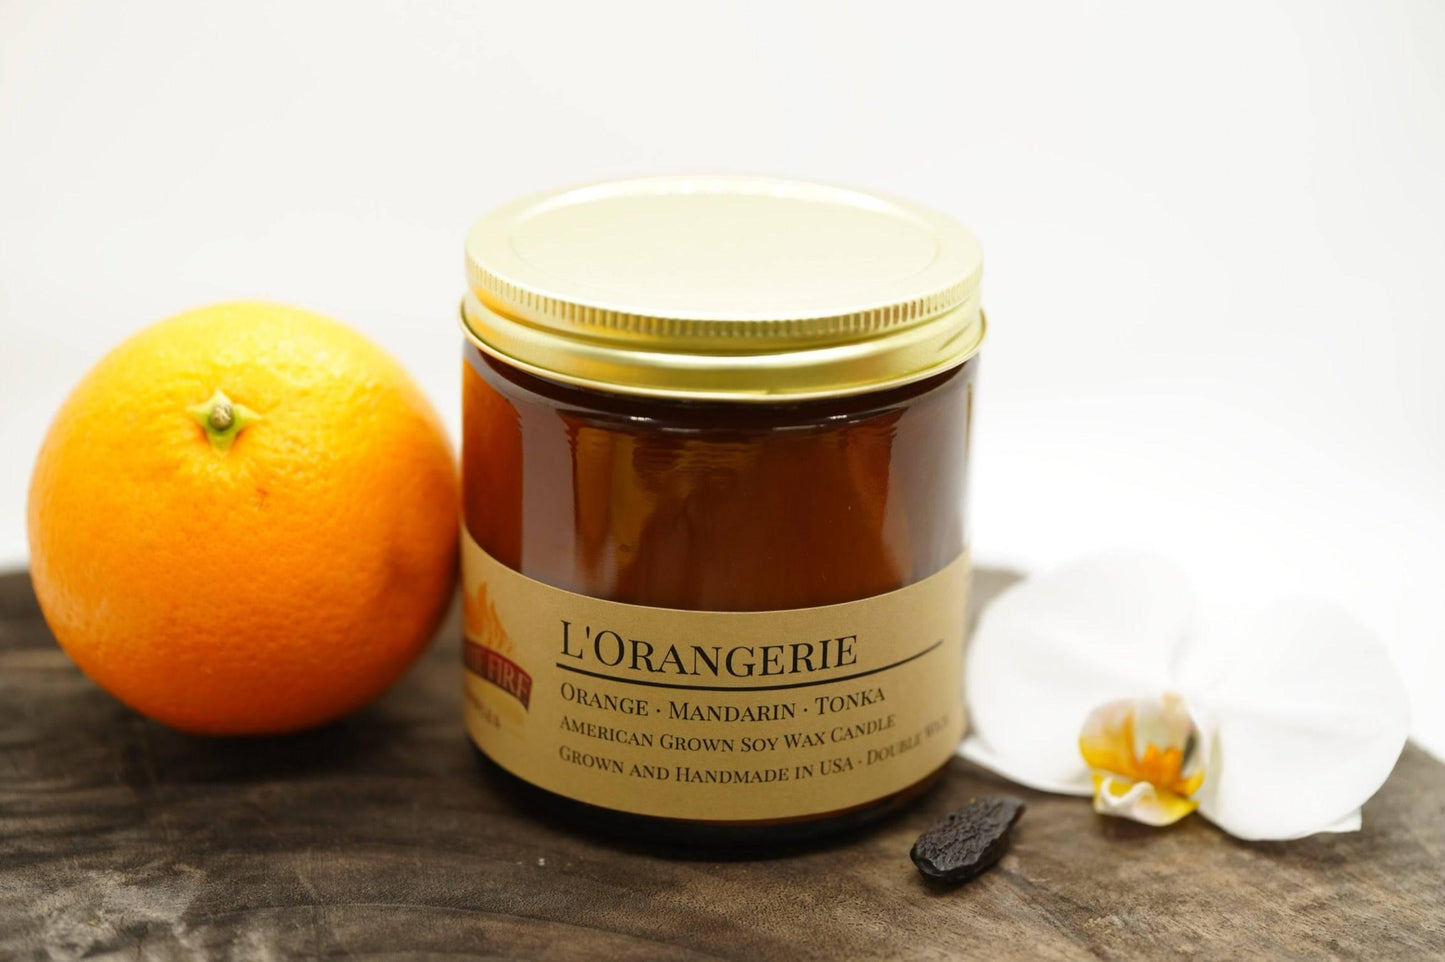 l'orangerie soy wax candle | 16 oz double wick amber apothecary jar by prairie fire tallow, candles, and lavender